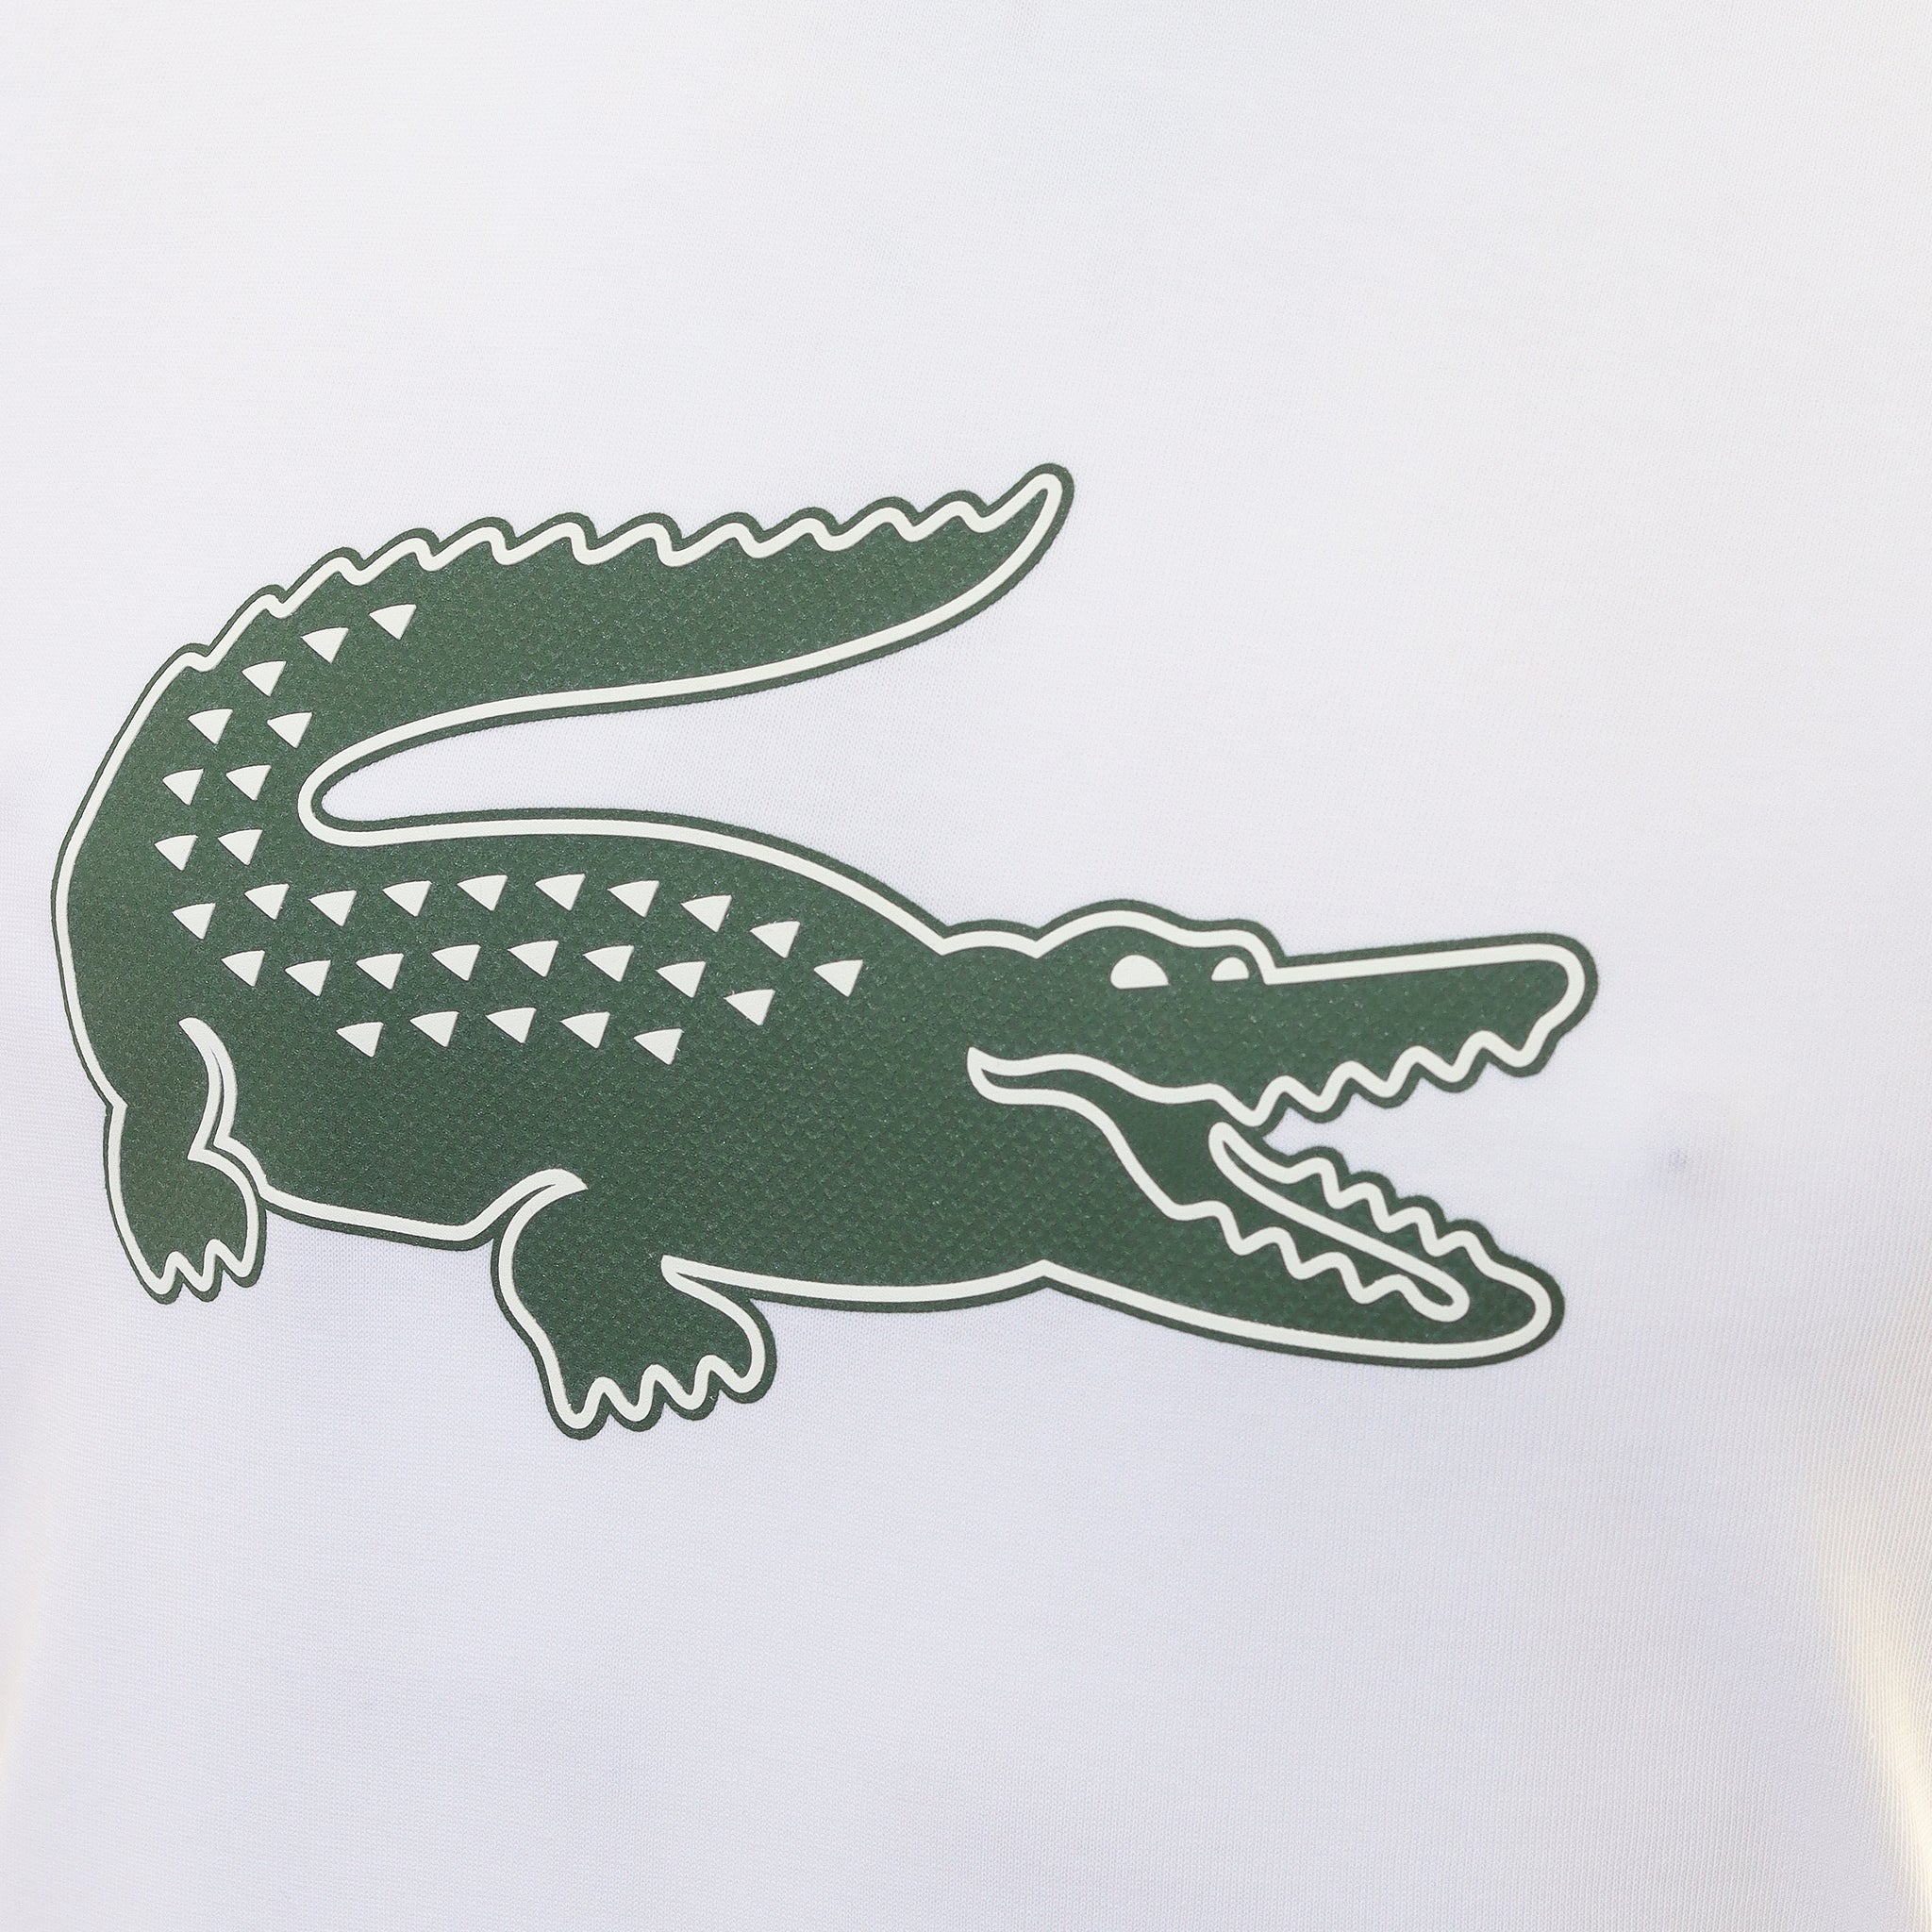 Lacoste Large Croc Print Tee Shirt TH2042 White Green 737 | Function18 ...